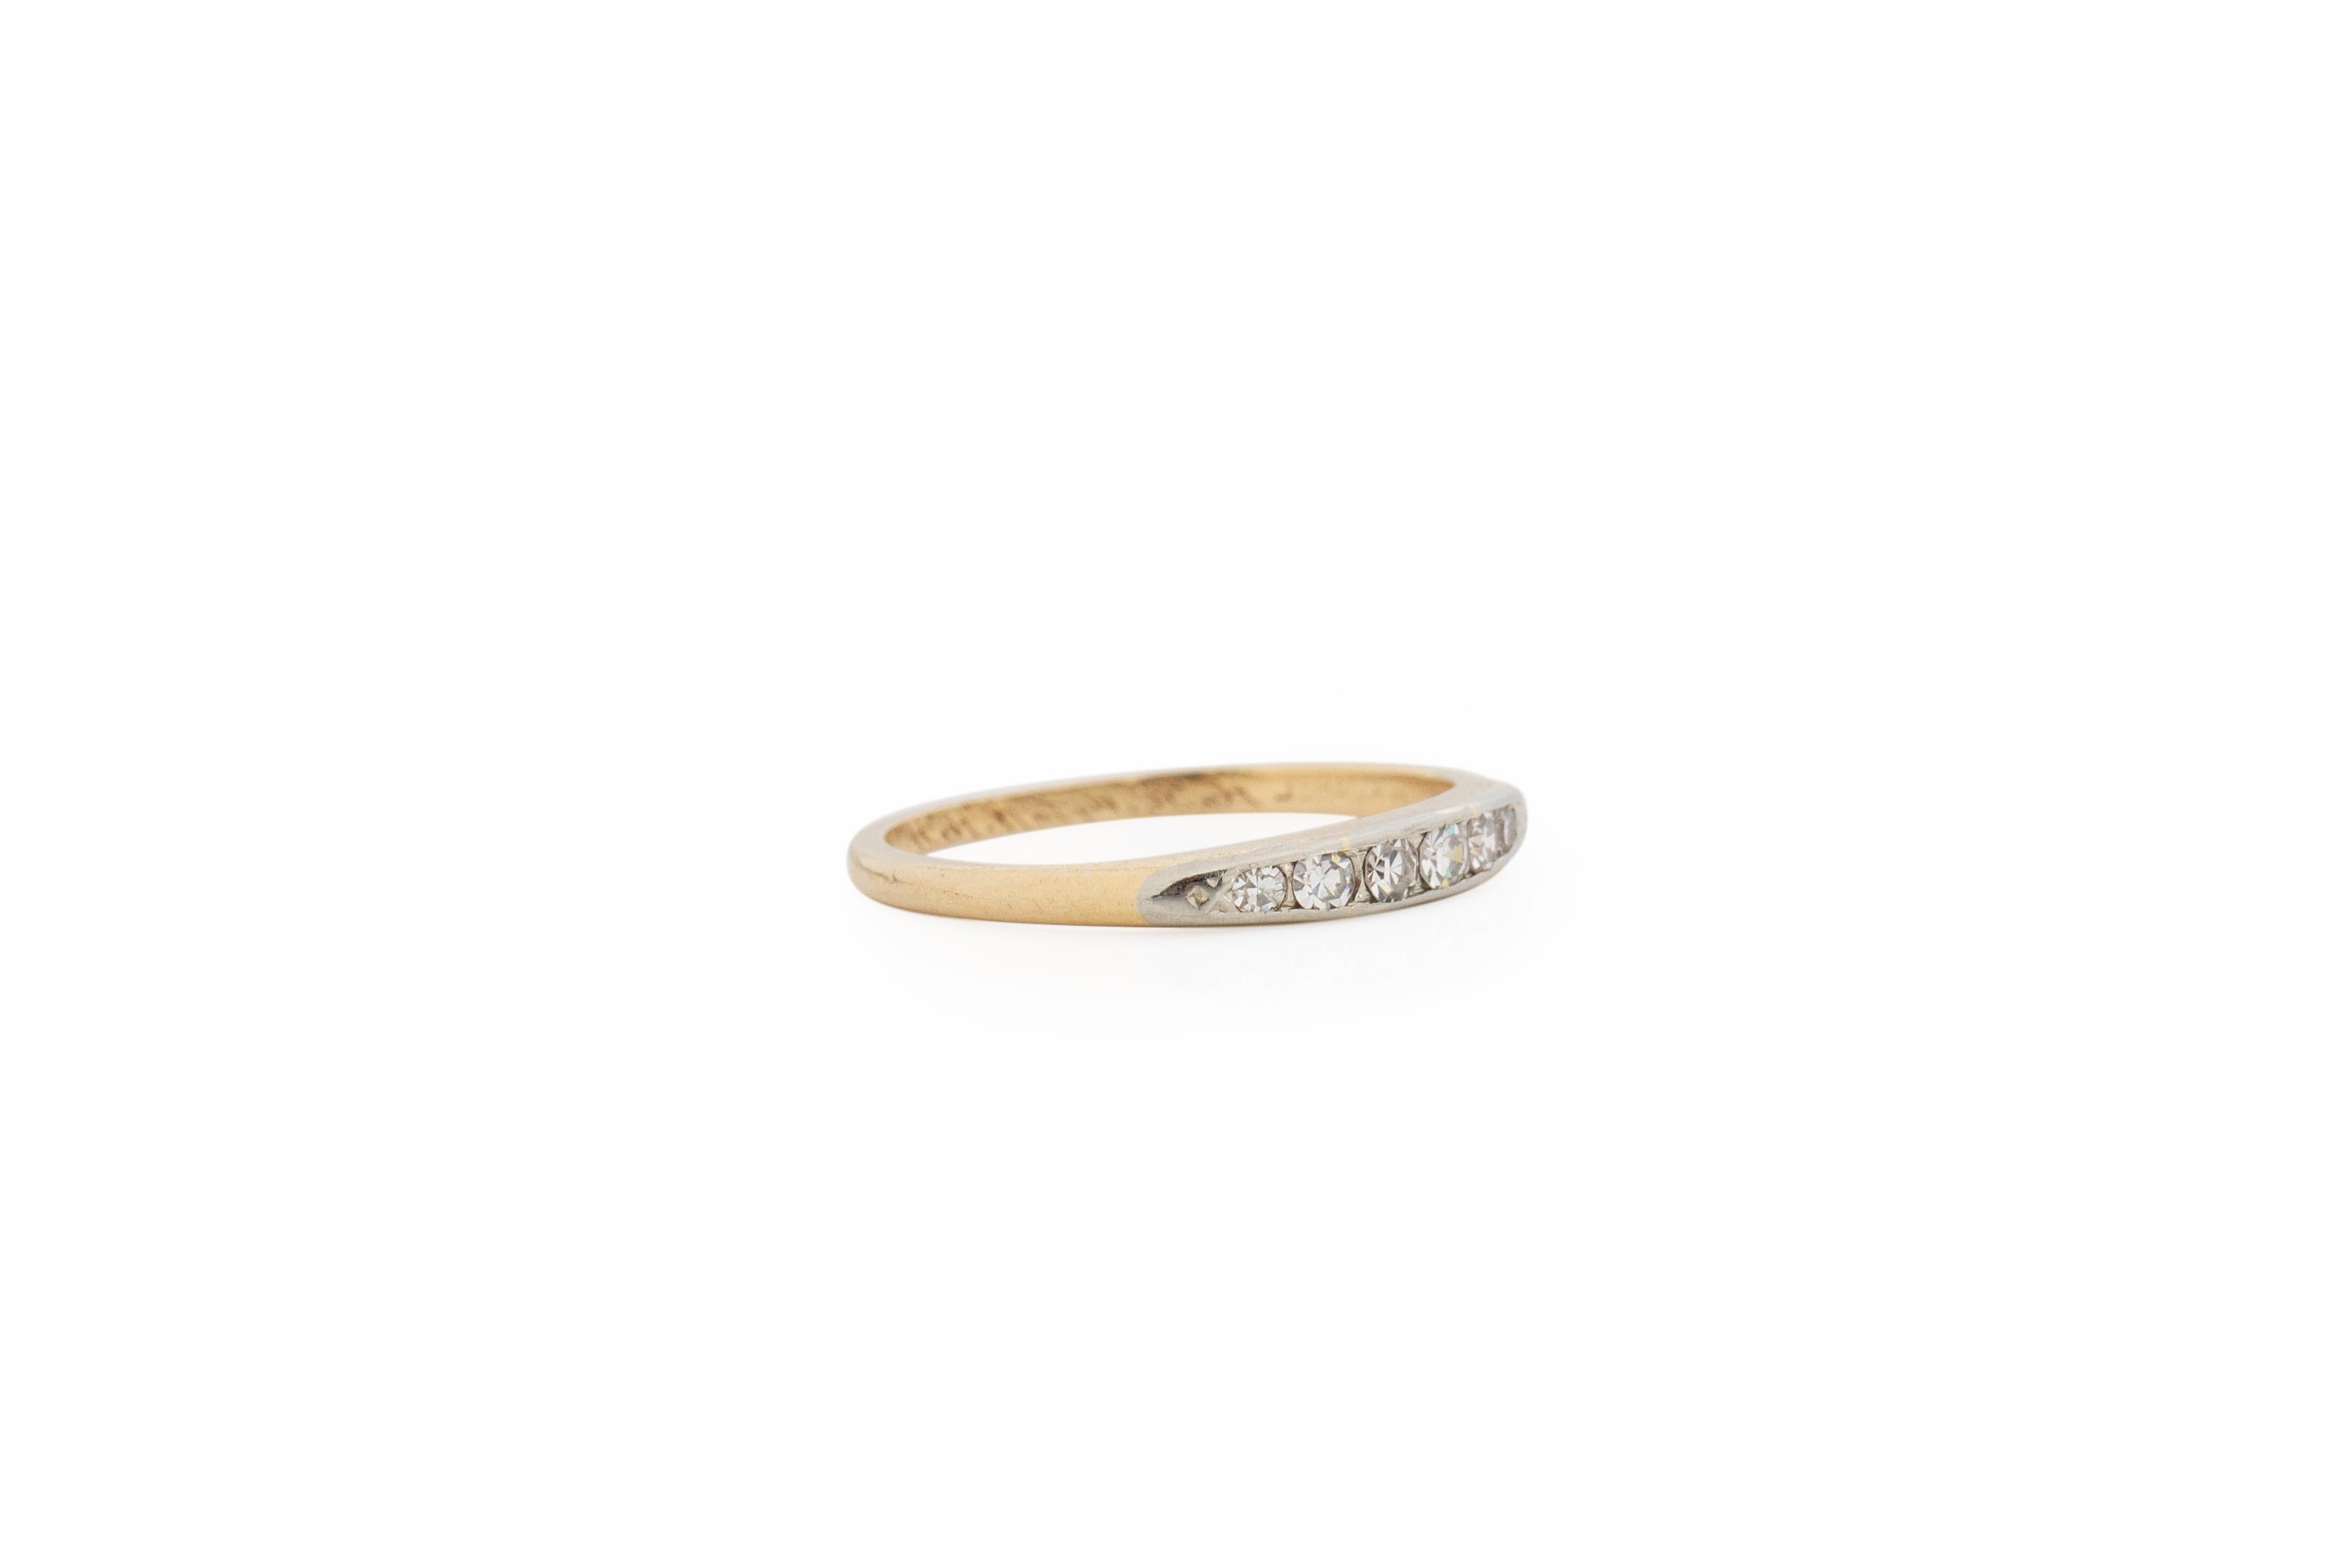 Ring Size: 4.25
Metal Type: 14 Karat Yellow Gold [Hallmarked, and Tested]
Weight: 1.5 grams

Diamond Details:
Weight: .15 carat total weight
Cut: Old European brilliant
Color: H
Clarity: VS

Finger to Top of Stone Measurement: 3 mm
Condition: